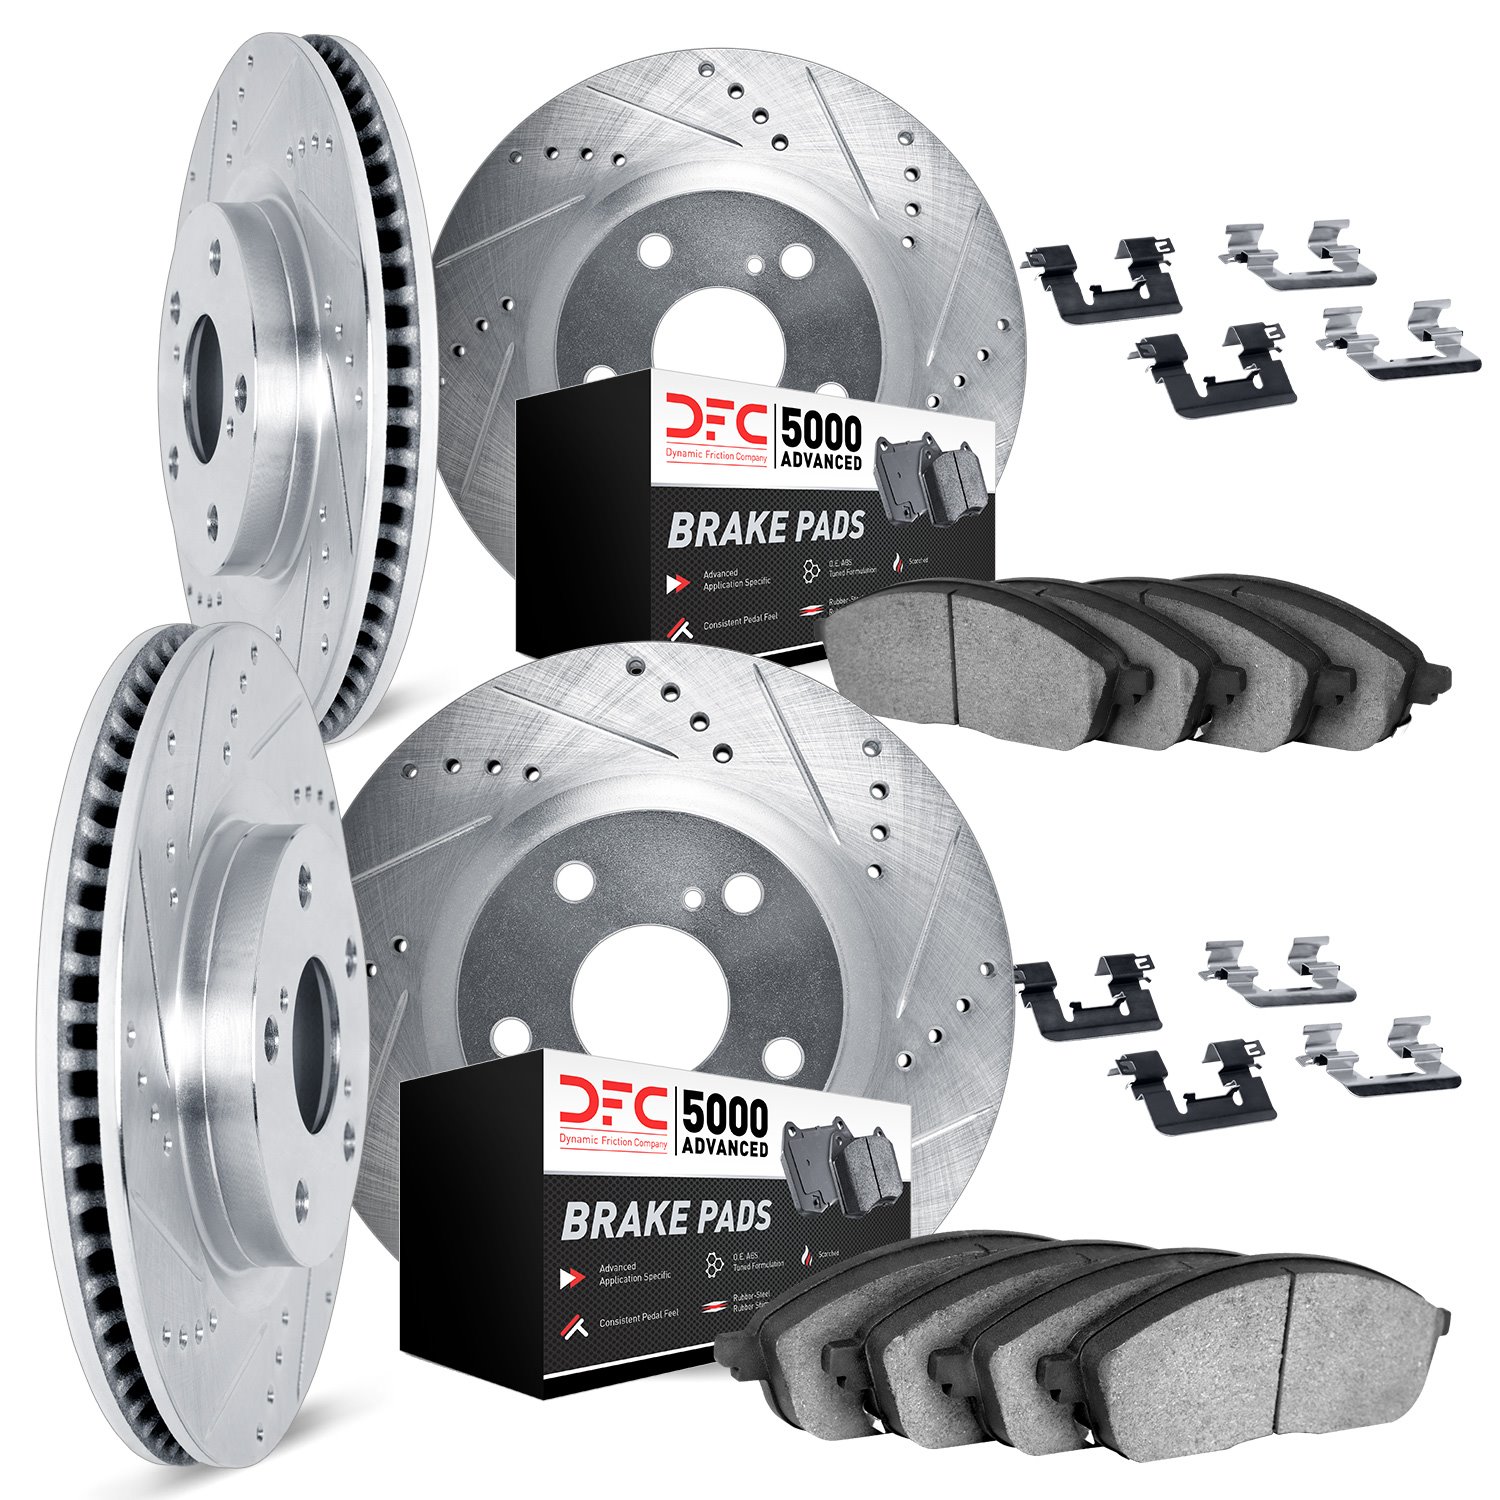 7514-31019 Drilled/Slotted Brake Rotors w/5000 Advanced Brake Pads Kit & Hardware [Silver], 2008-2013 BMW, Position: Front and R